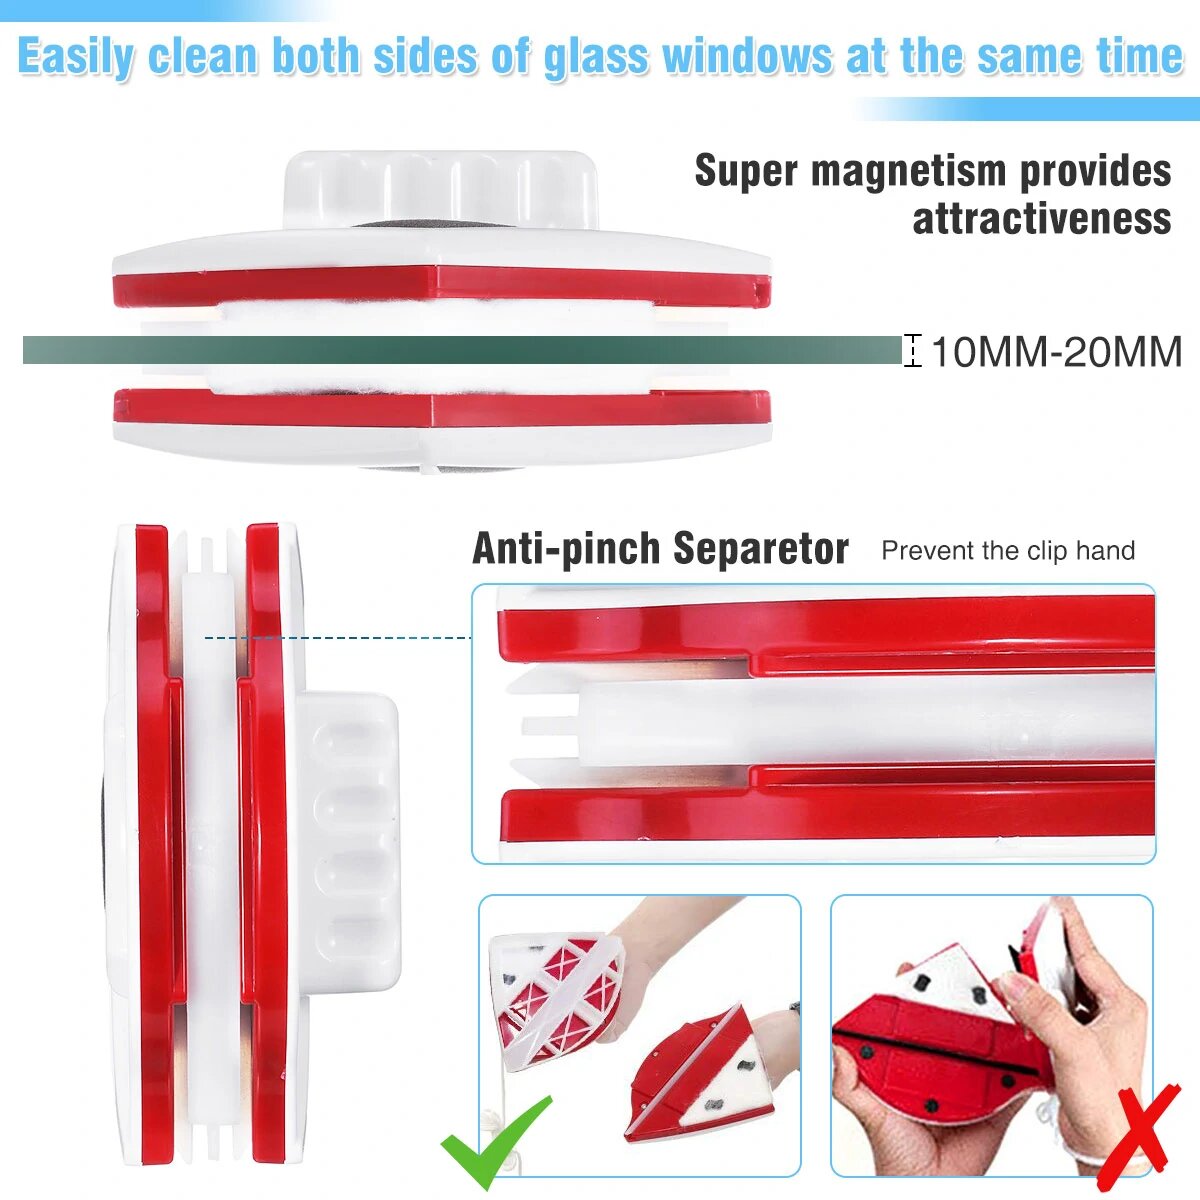 The Z1 Double-sided Magnetic Window Cleaner